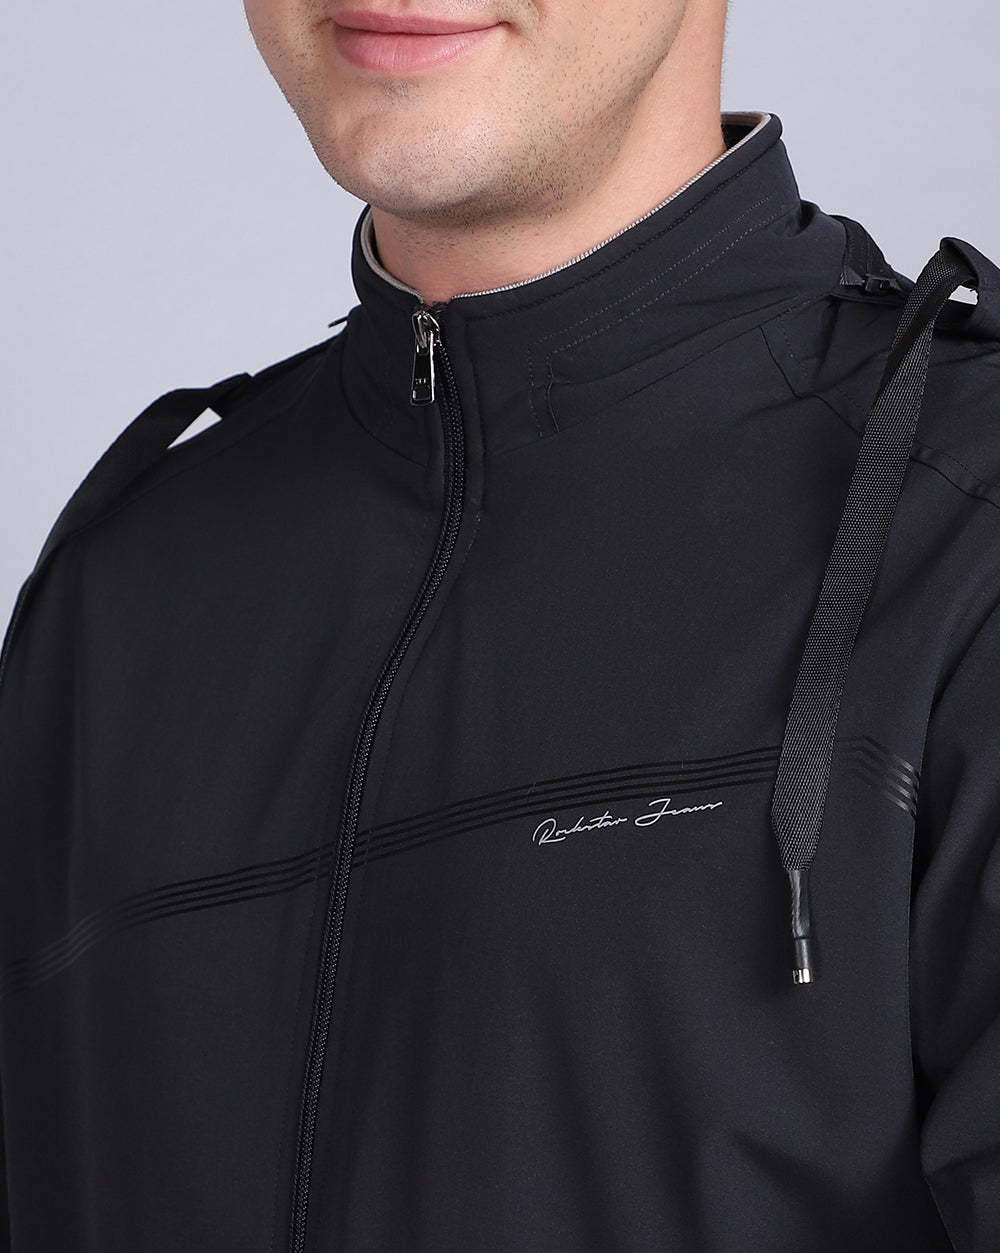 Mens Sports Tracksuit Set With Hoodie Jacket And Performax Track Pants  Sweat Suit For Jogging And Outdoor Activities Style #2782 From Zjxrm,  $54.95 | DHgate.Com